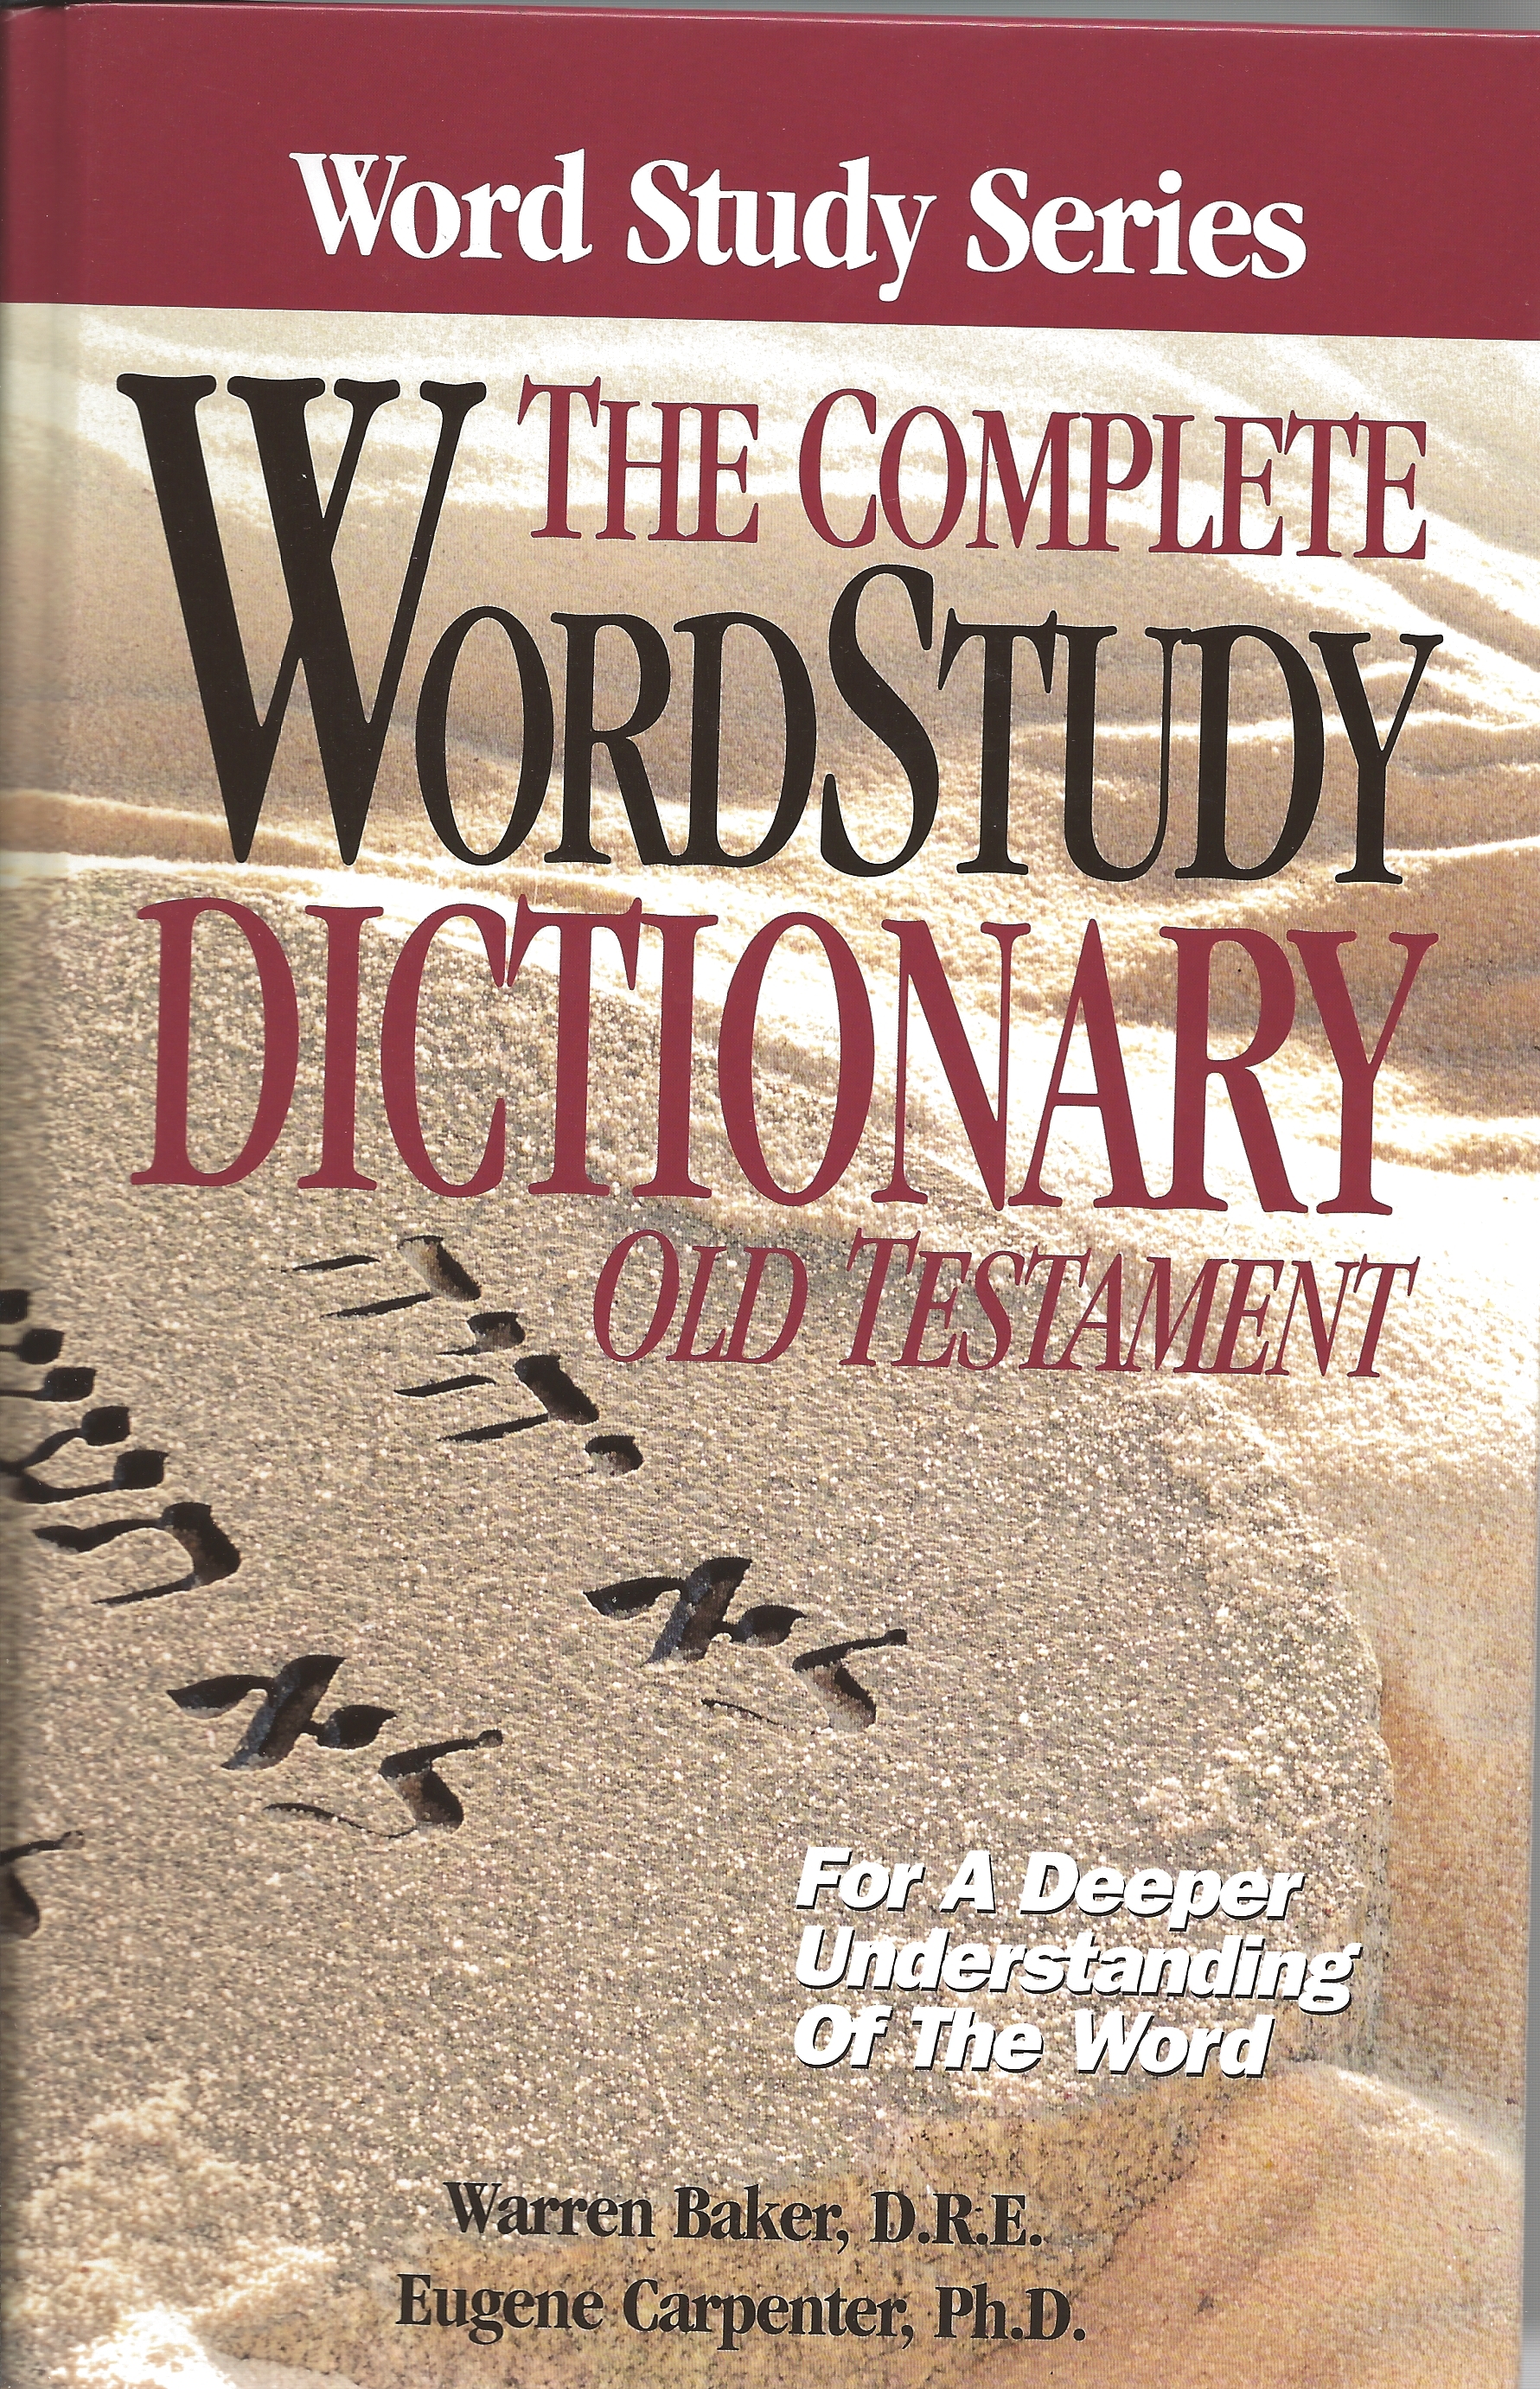 THE COMPLETE WORD STUDY DICTIONARY OLD TESTAMENT W. Baker